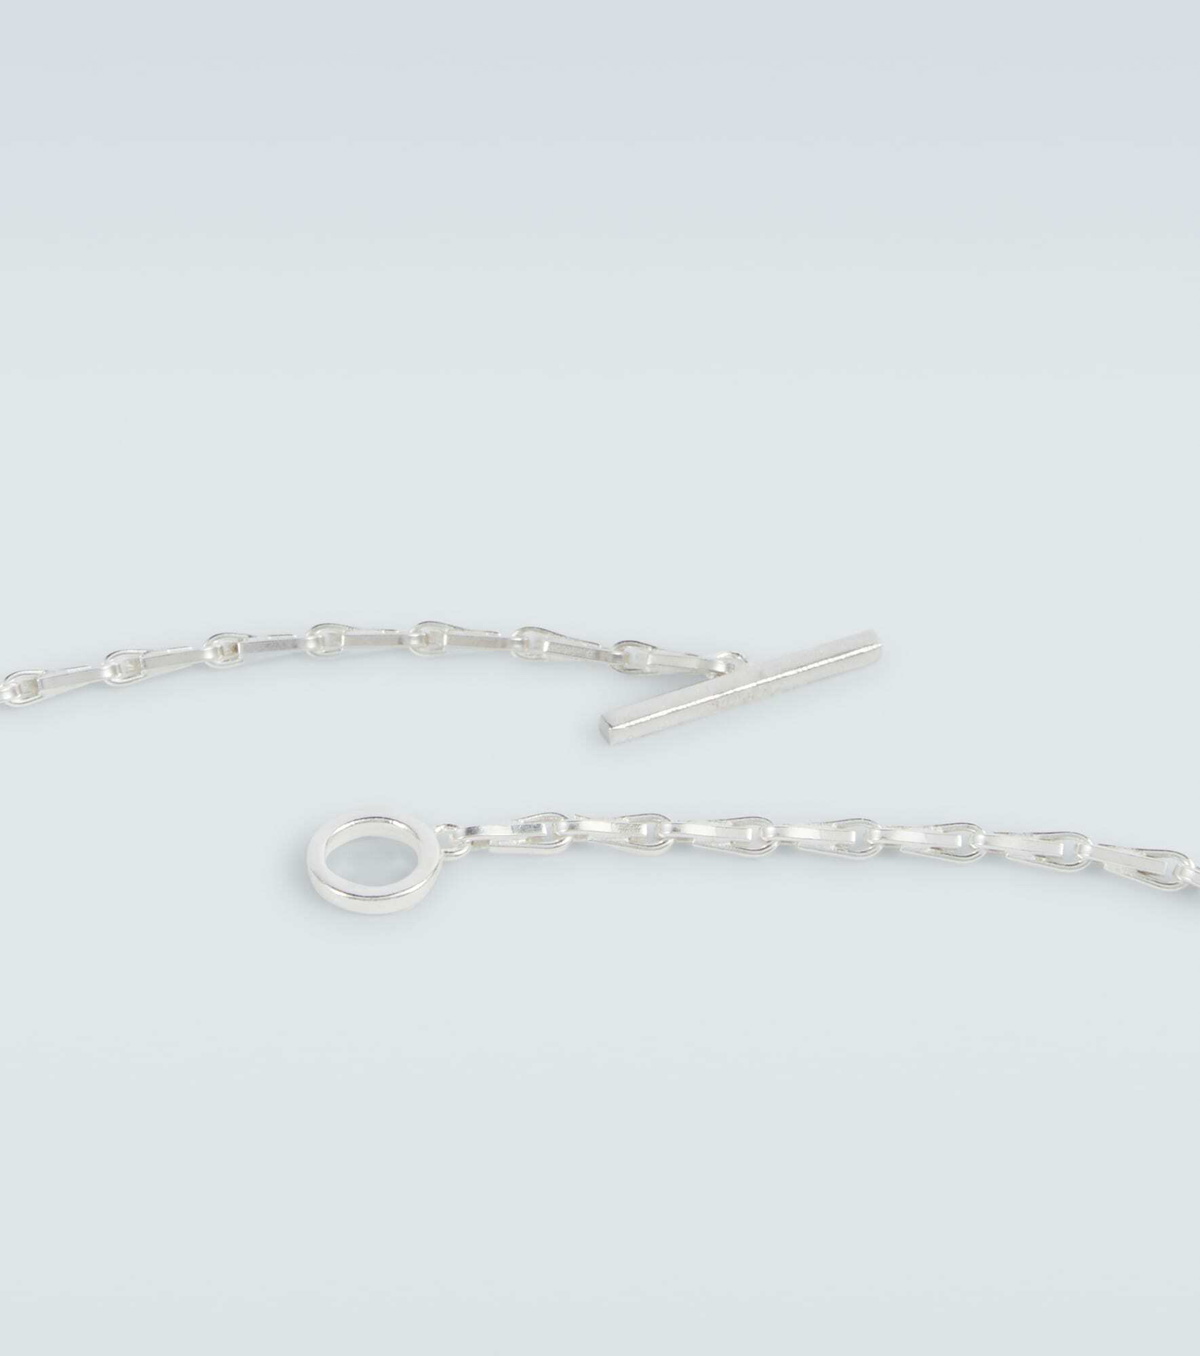 All Blues Sterling Silver Standard Thin Chain Necklace